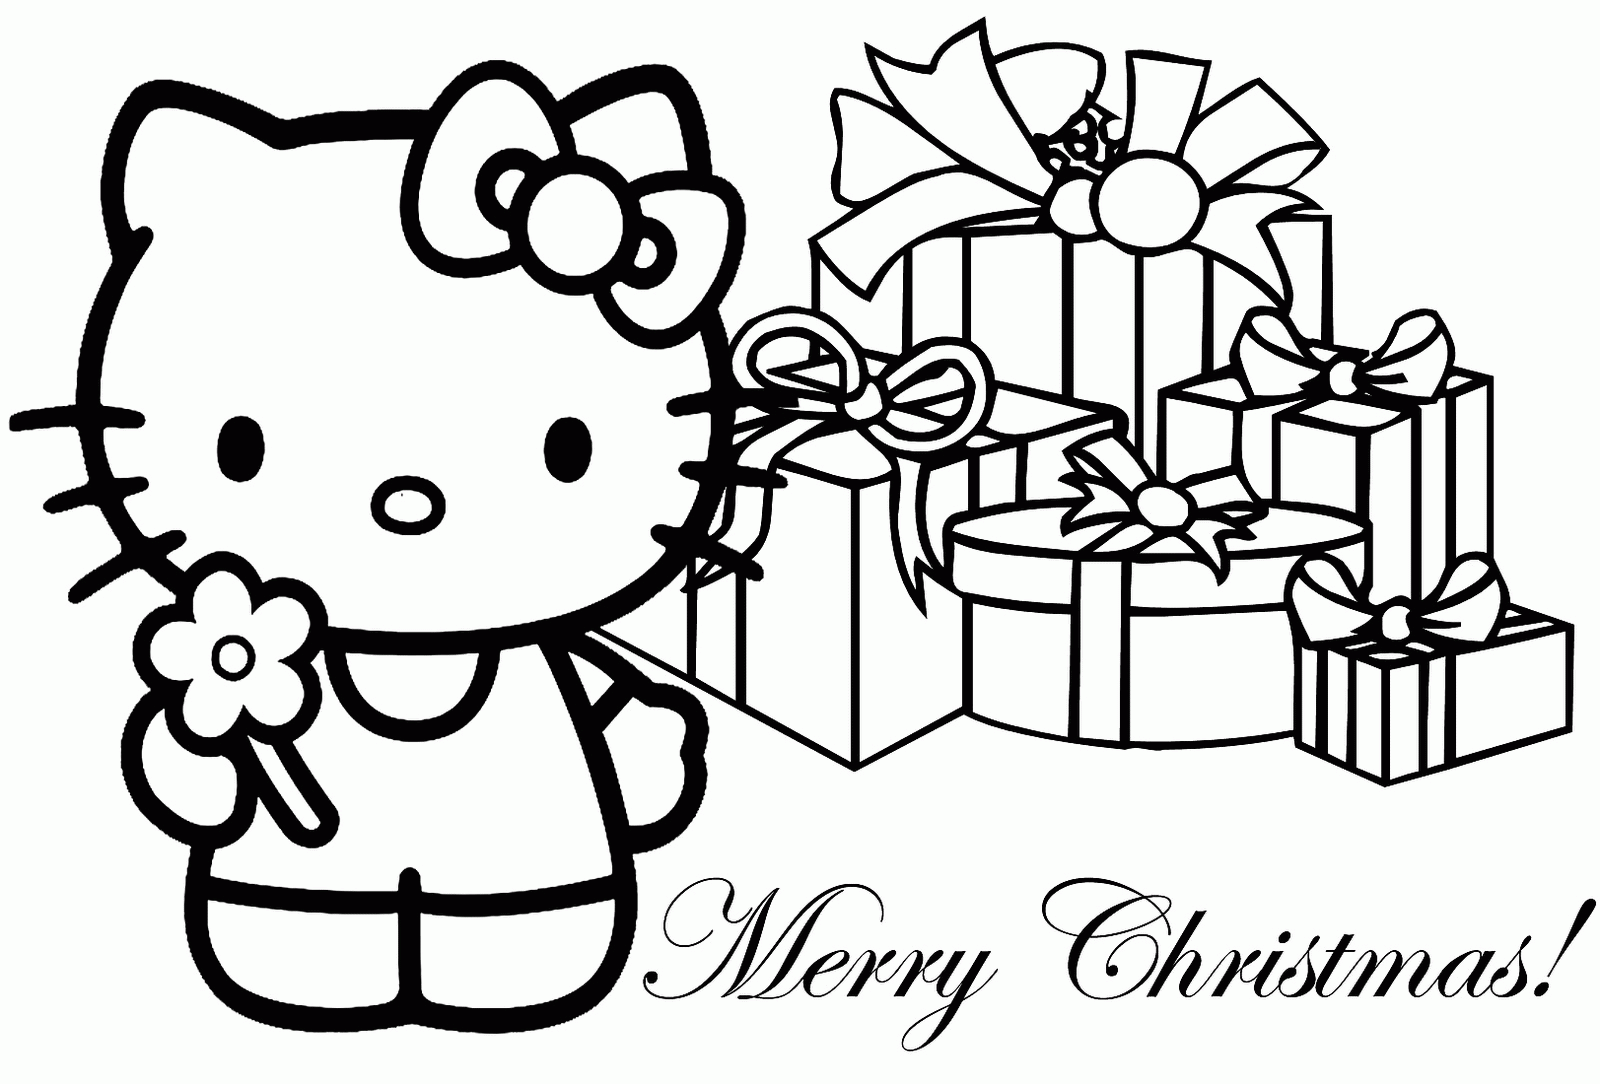 Christmas Coloring Page - Coloring Pages for Kids and for Adults